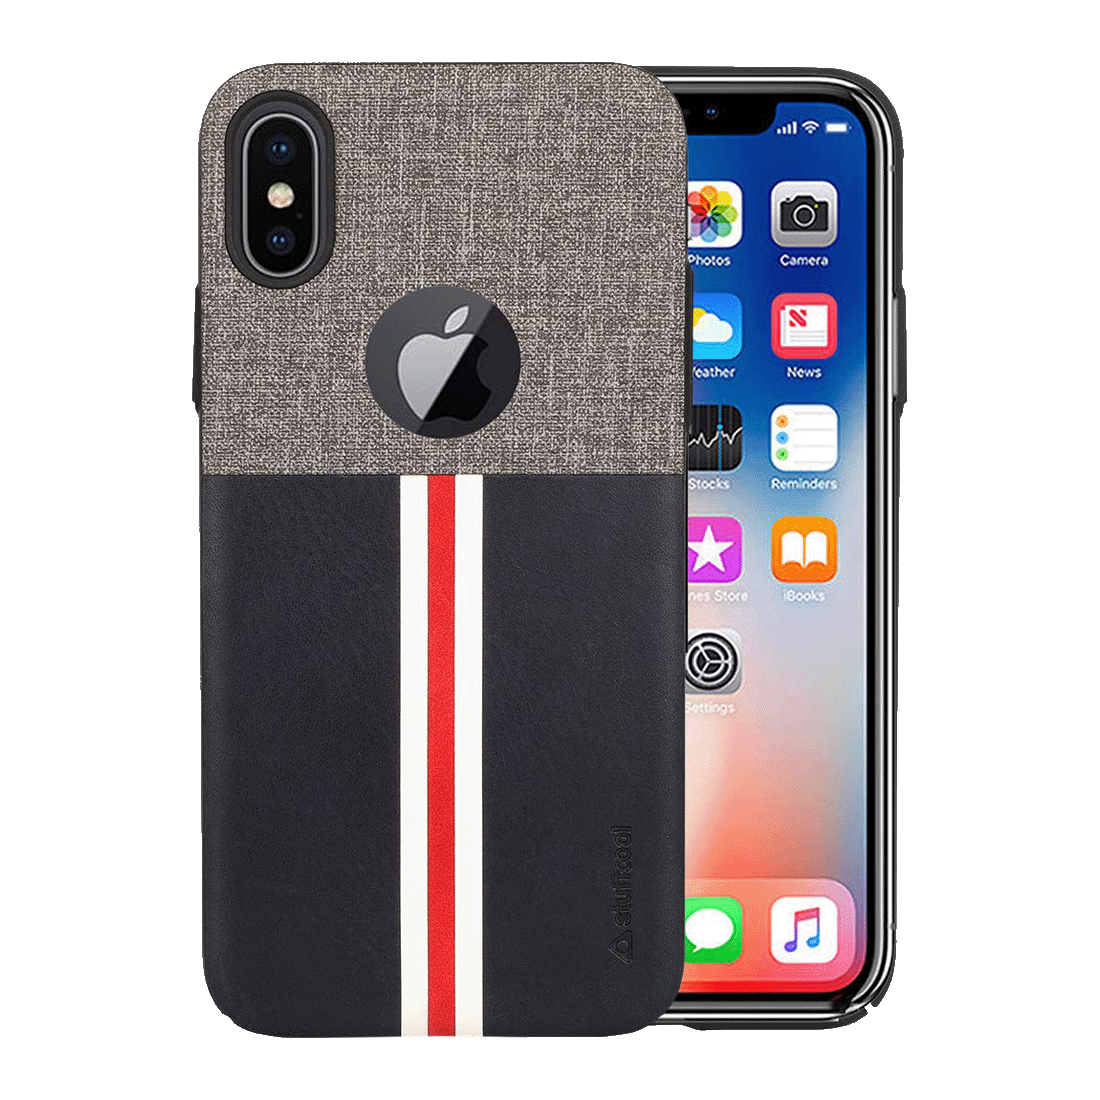 Stuffcool Eto Sport PU Leather Back Case Cover for Apple iPhone XS Max (ETOSPRTIP65, Black/Grey)_1